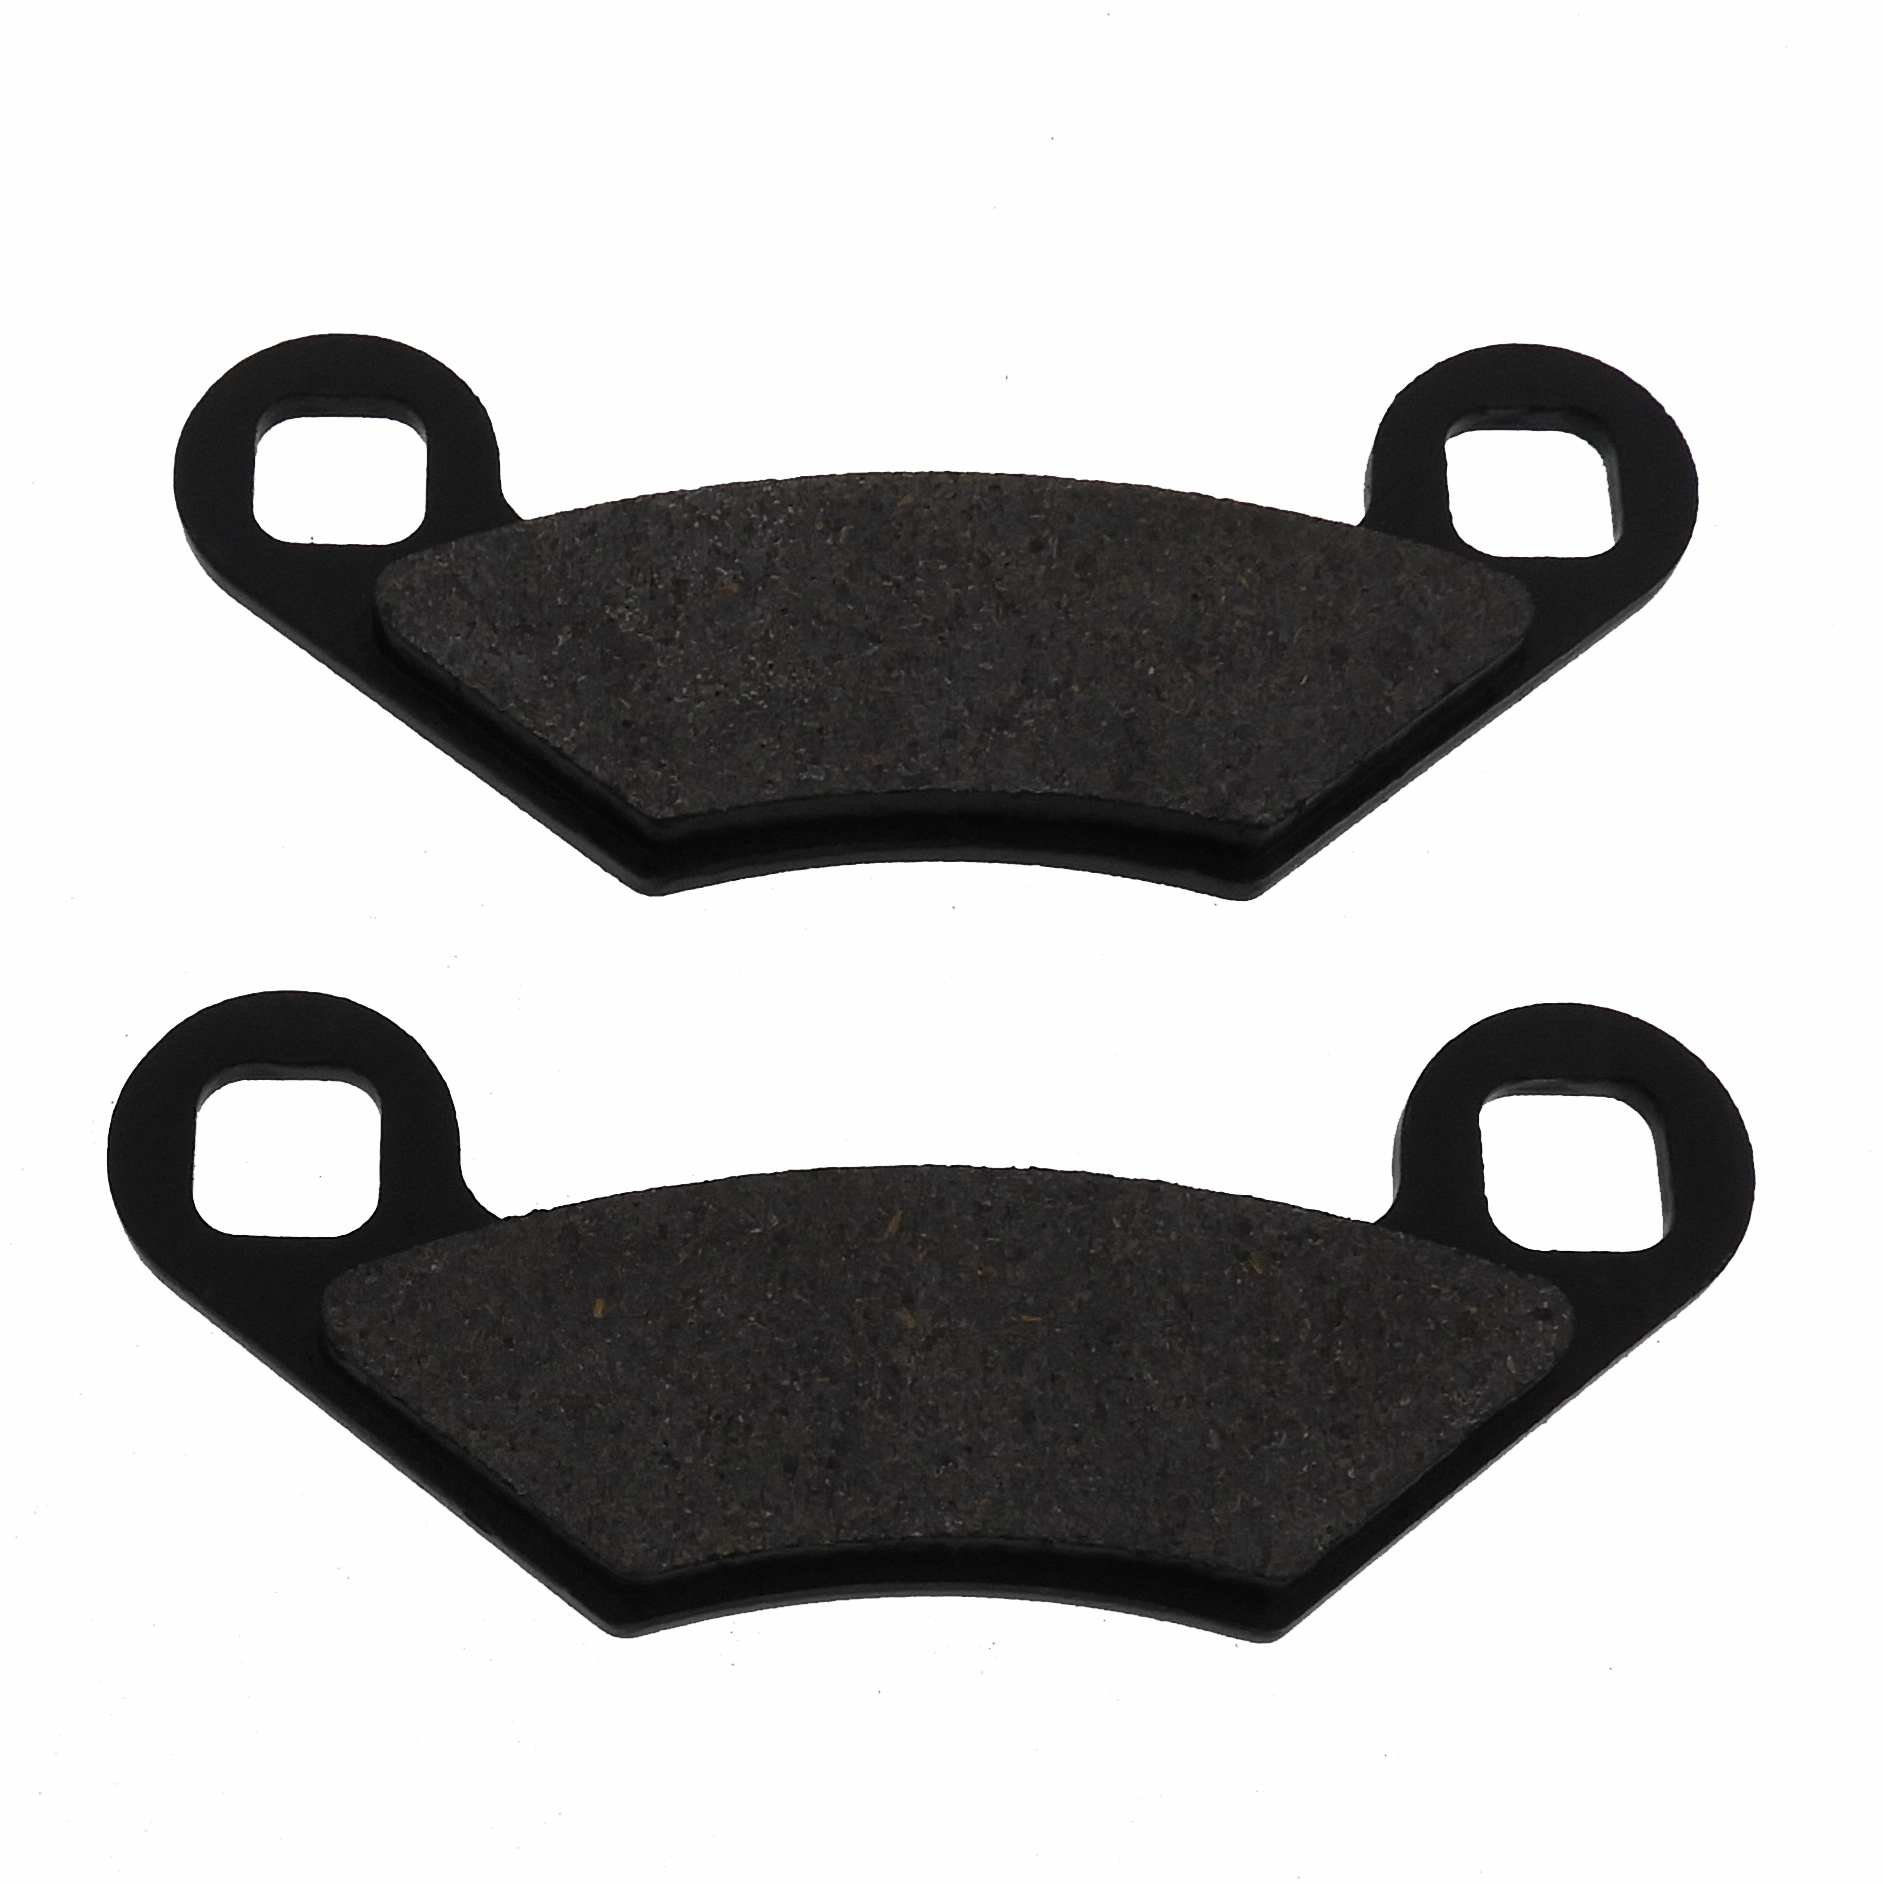 CycleATV 12 Sets 2002 Polaris 325 Magnum Hds 325 Magnum 4X4 Hds Front And Rear Brake Pads